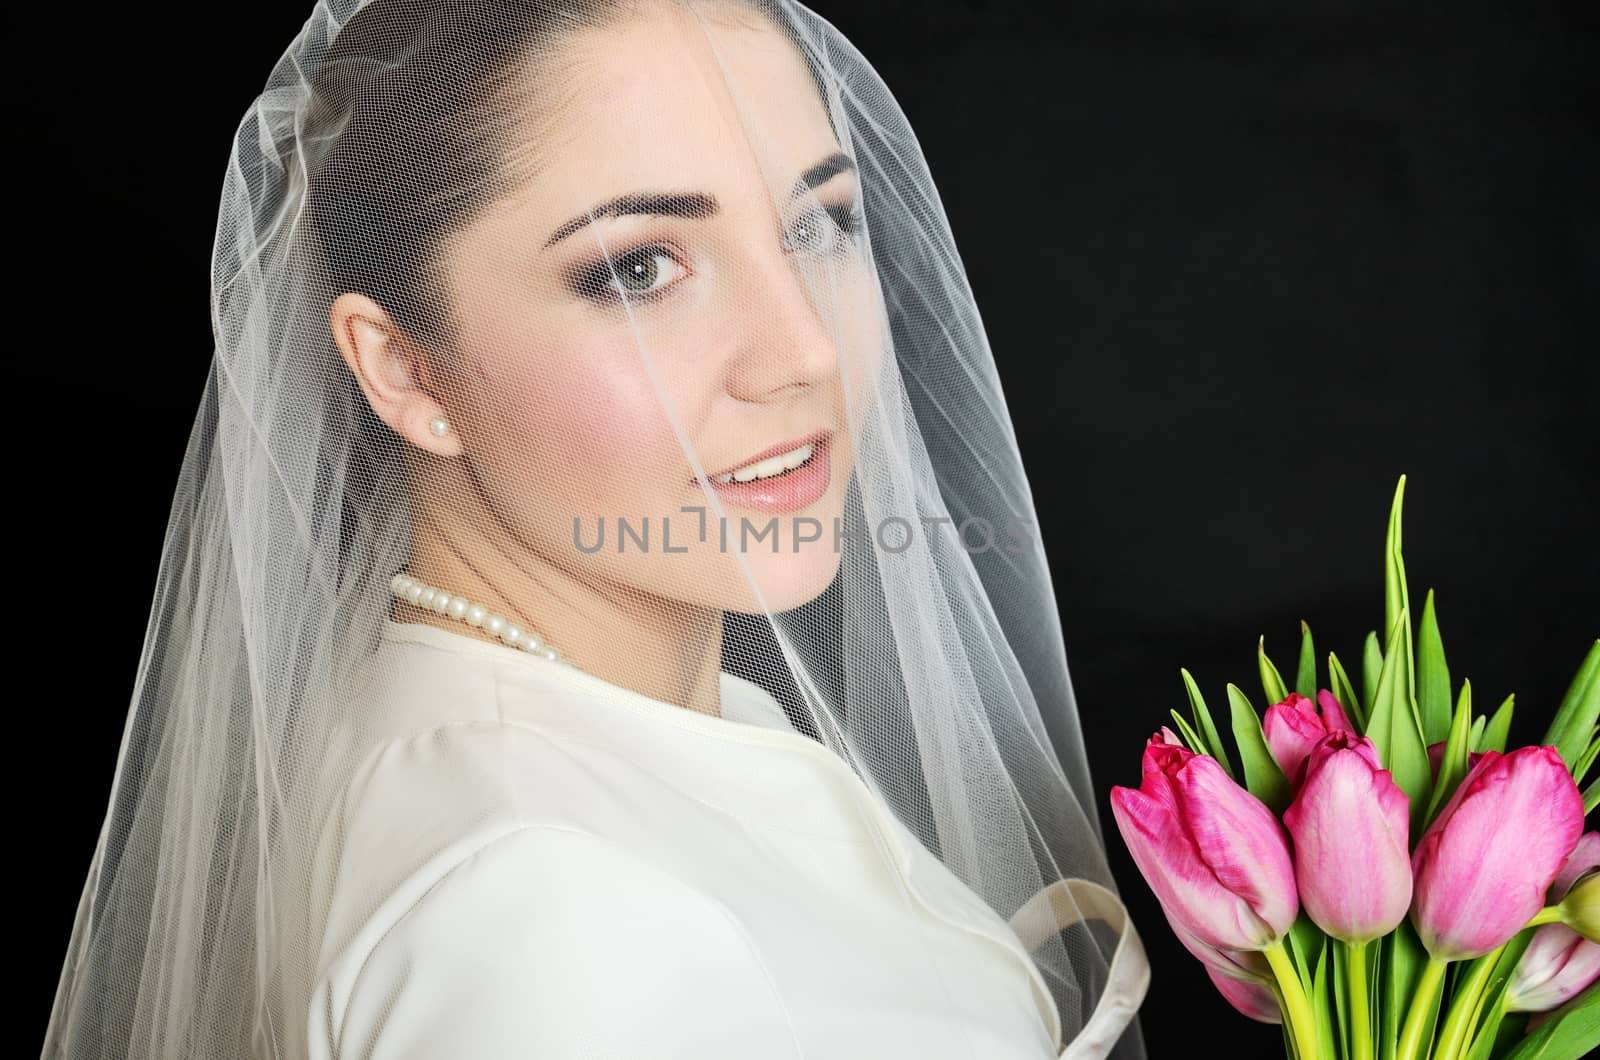 Female model, face covered with veil. Bride holds tulips bouquet. Portrait in studio with black background.
